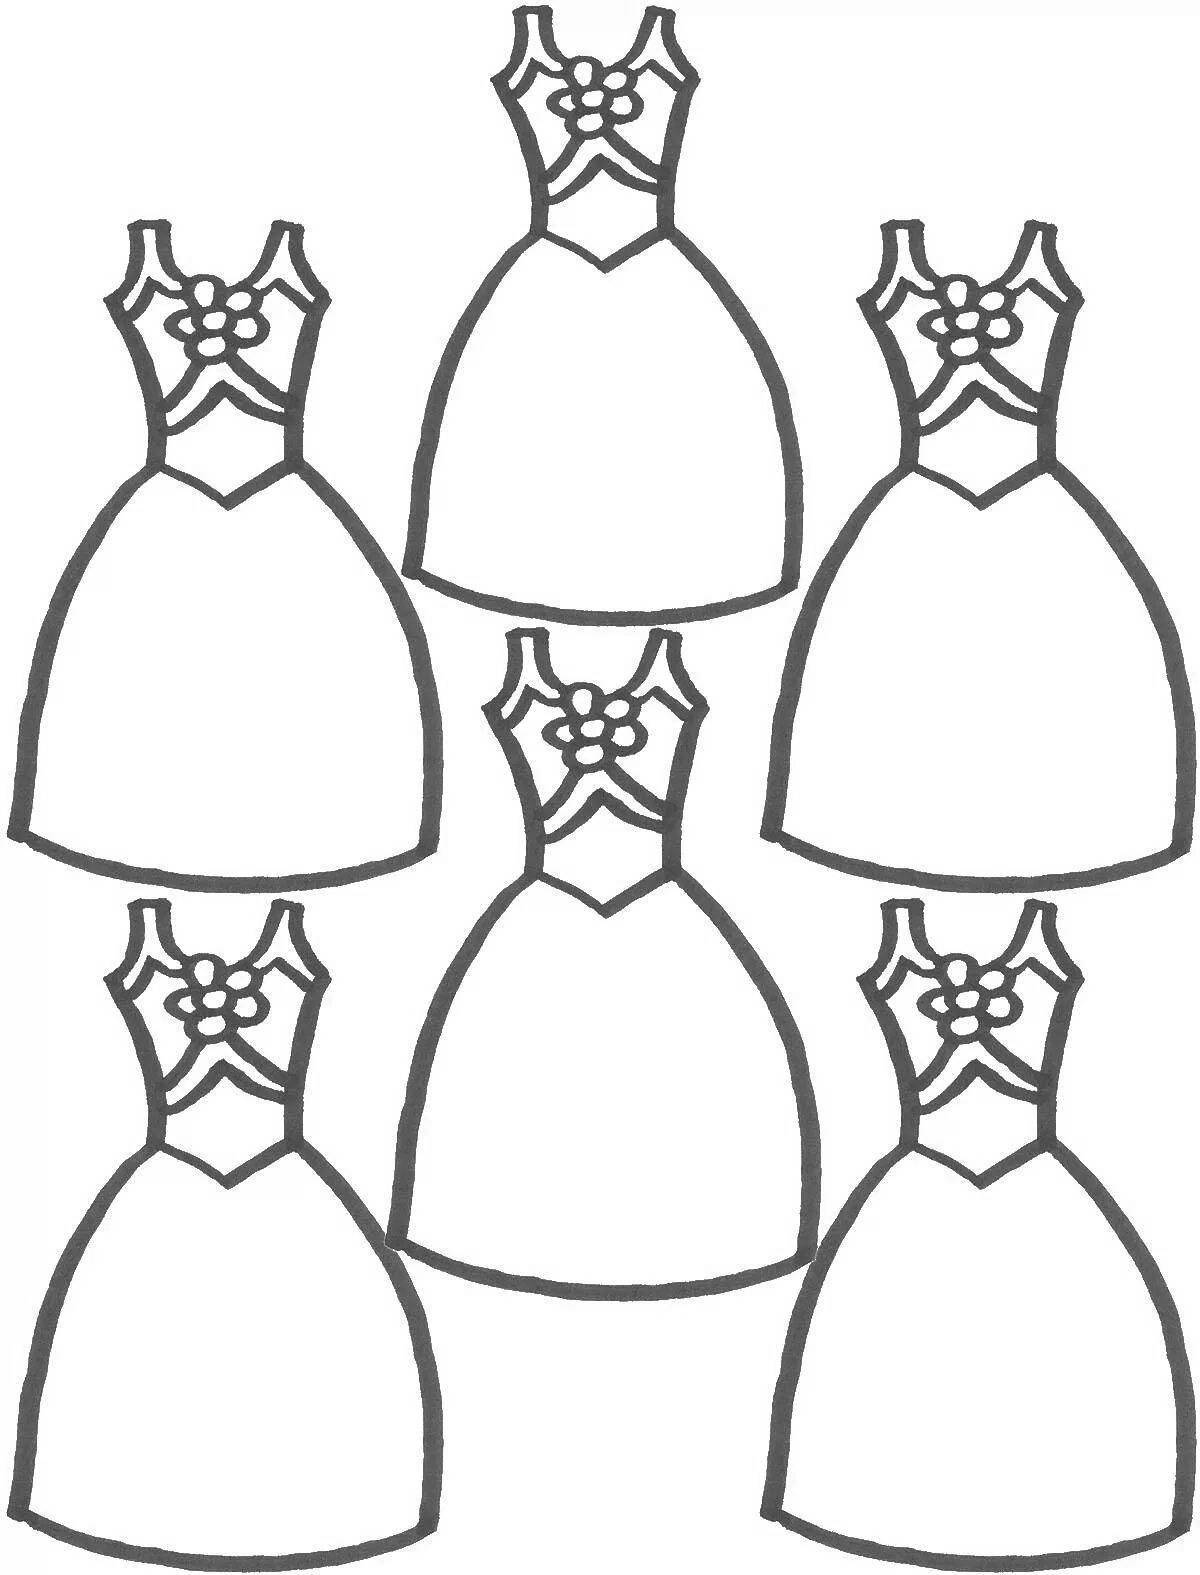 Coloring page with shining dress pattern